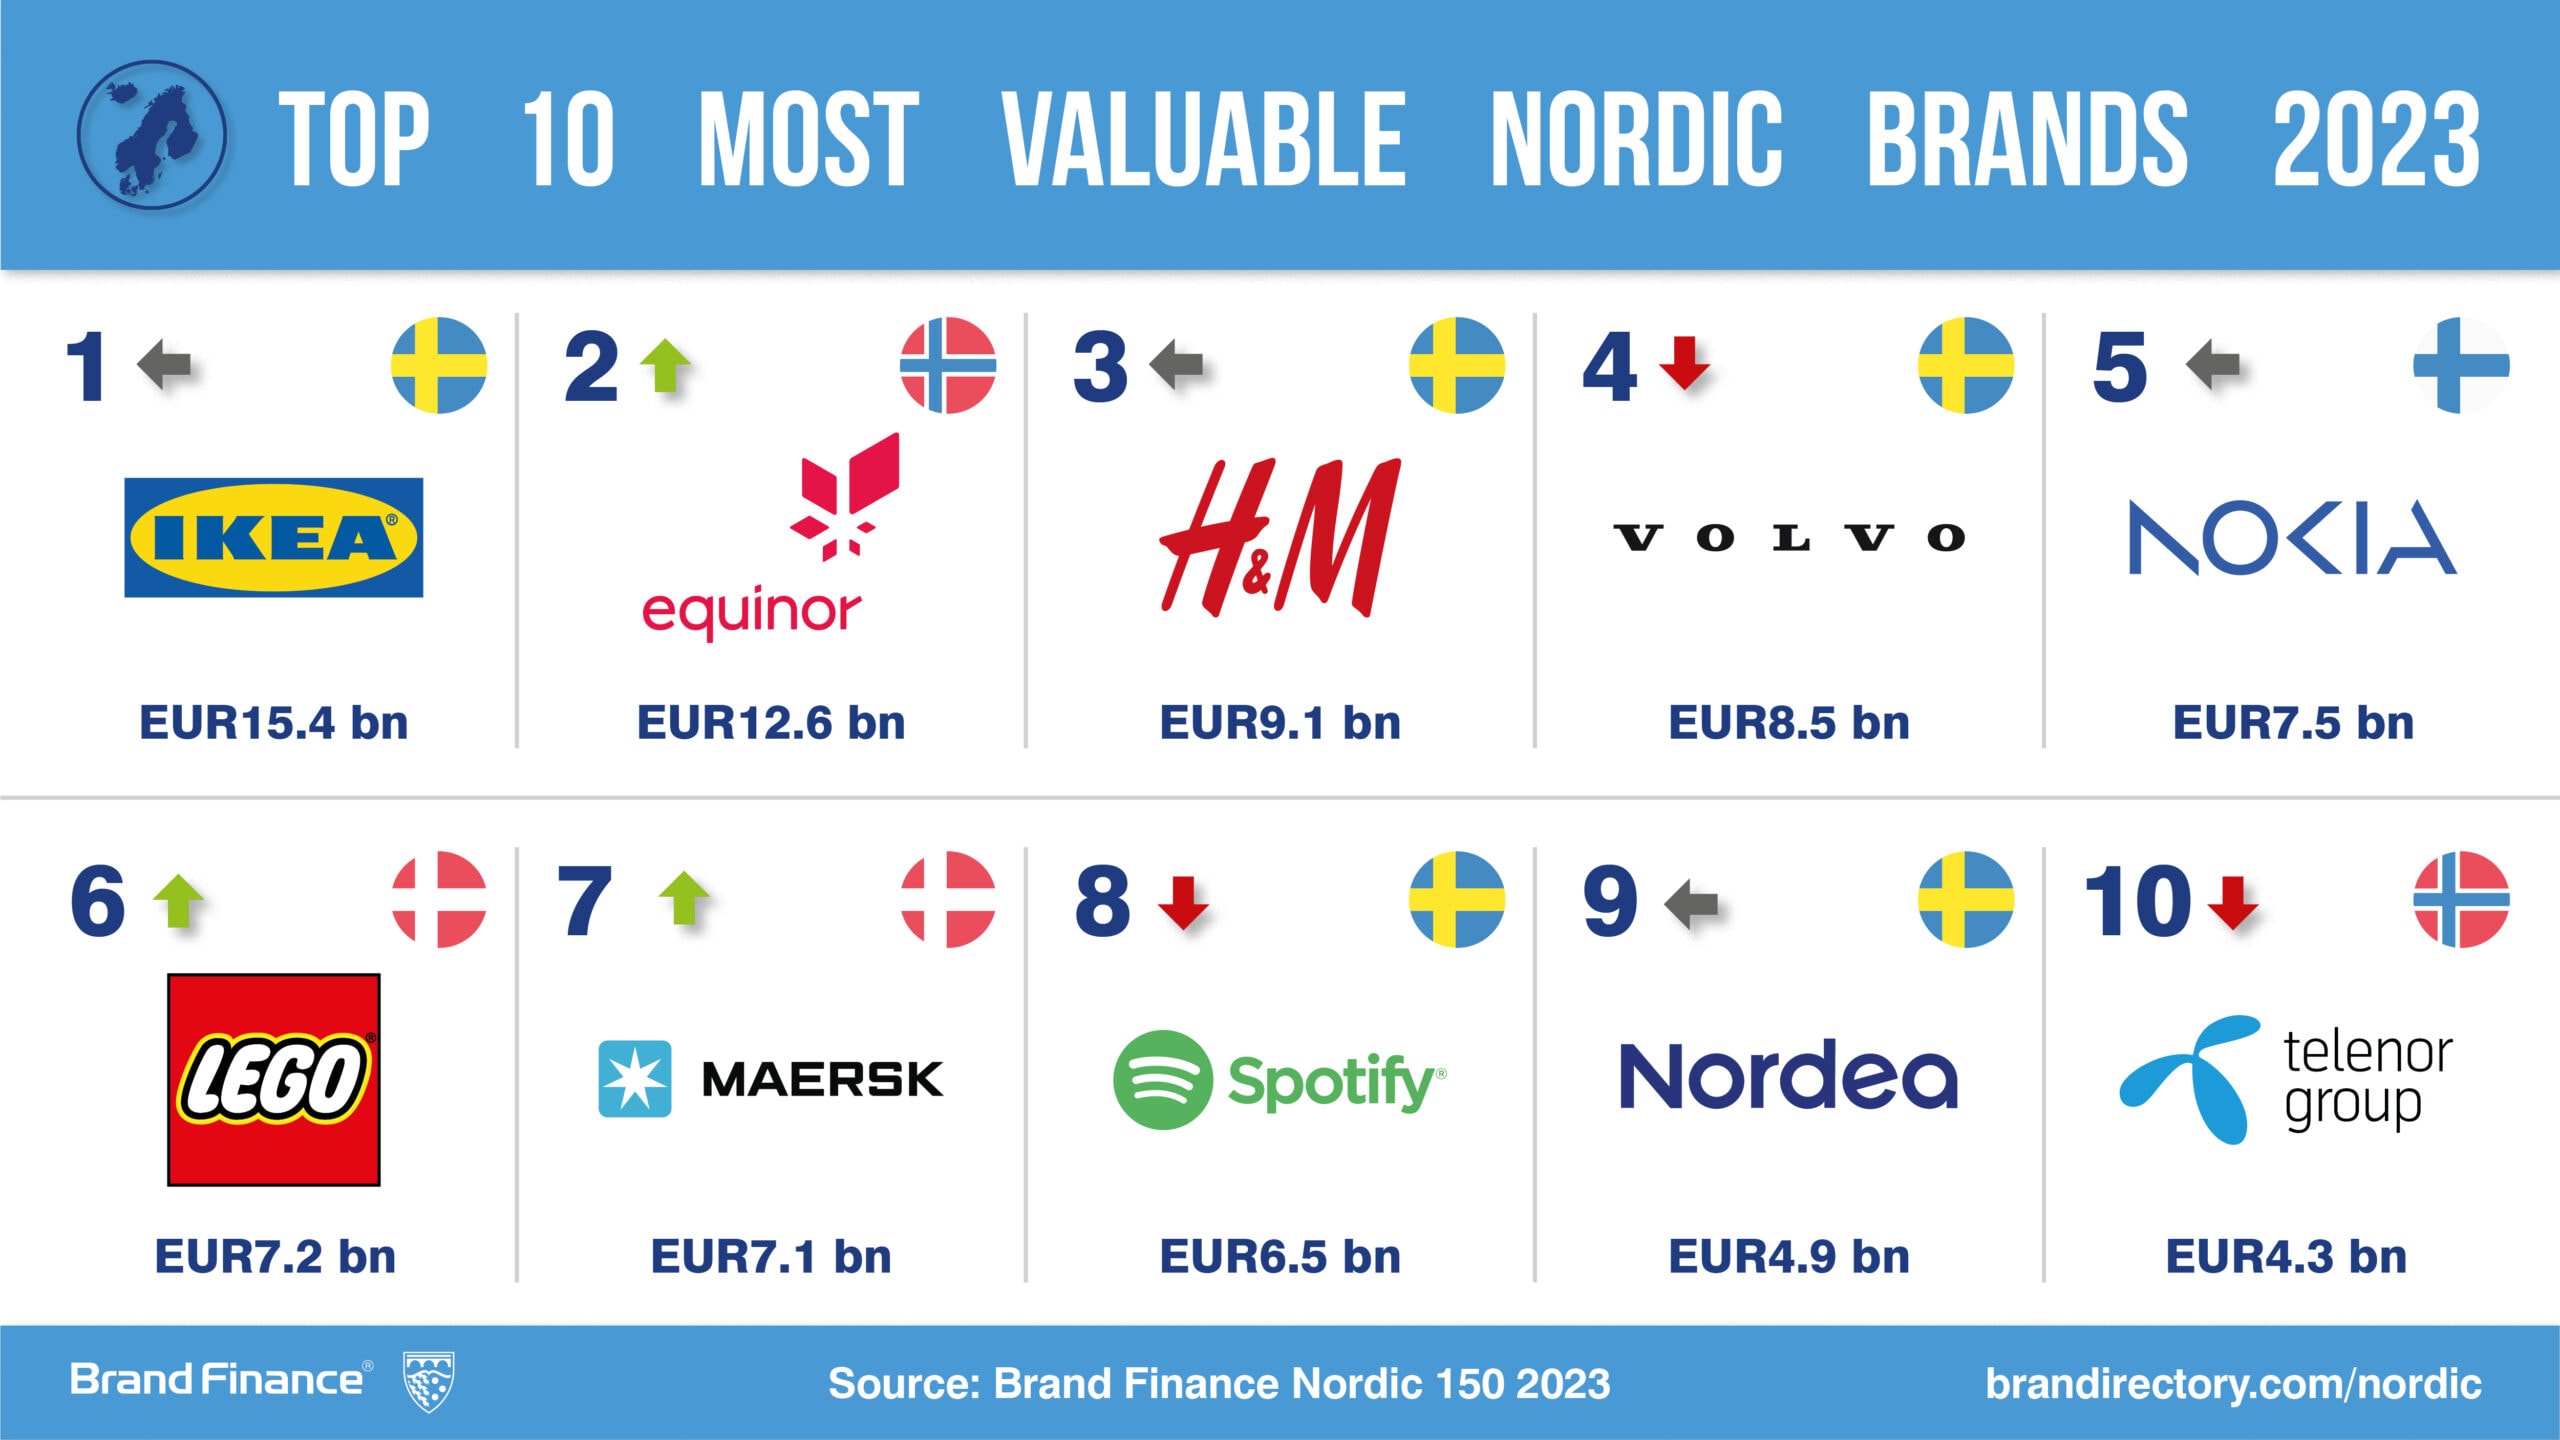 IKEA is reigning champion of Nordic brands but contends with declining ...